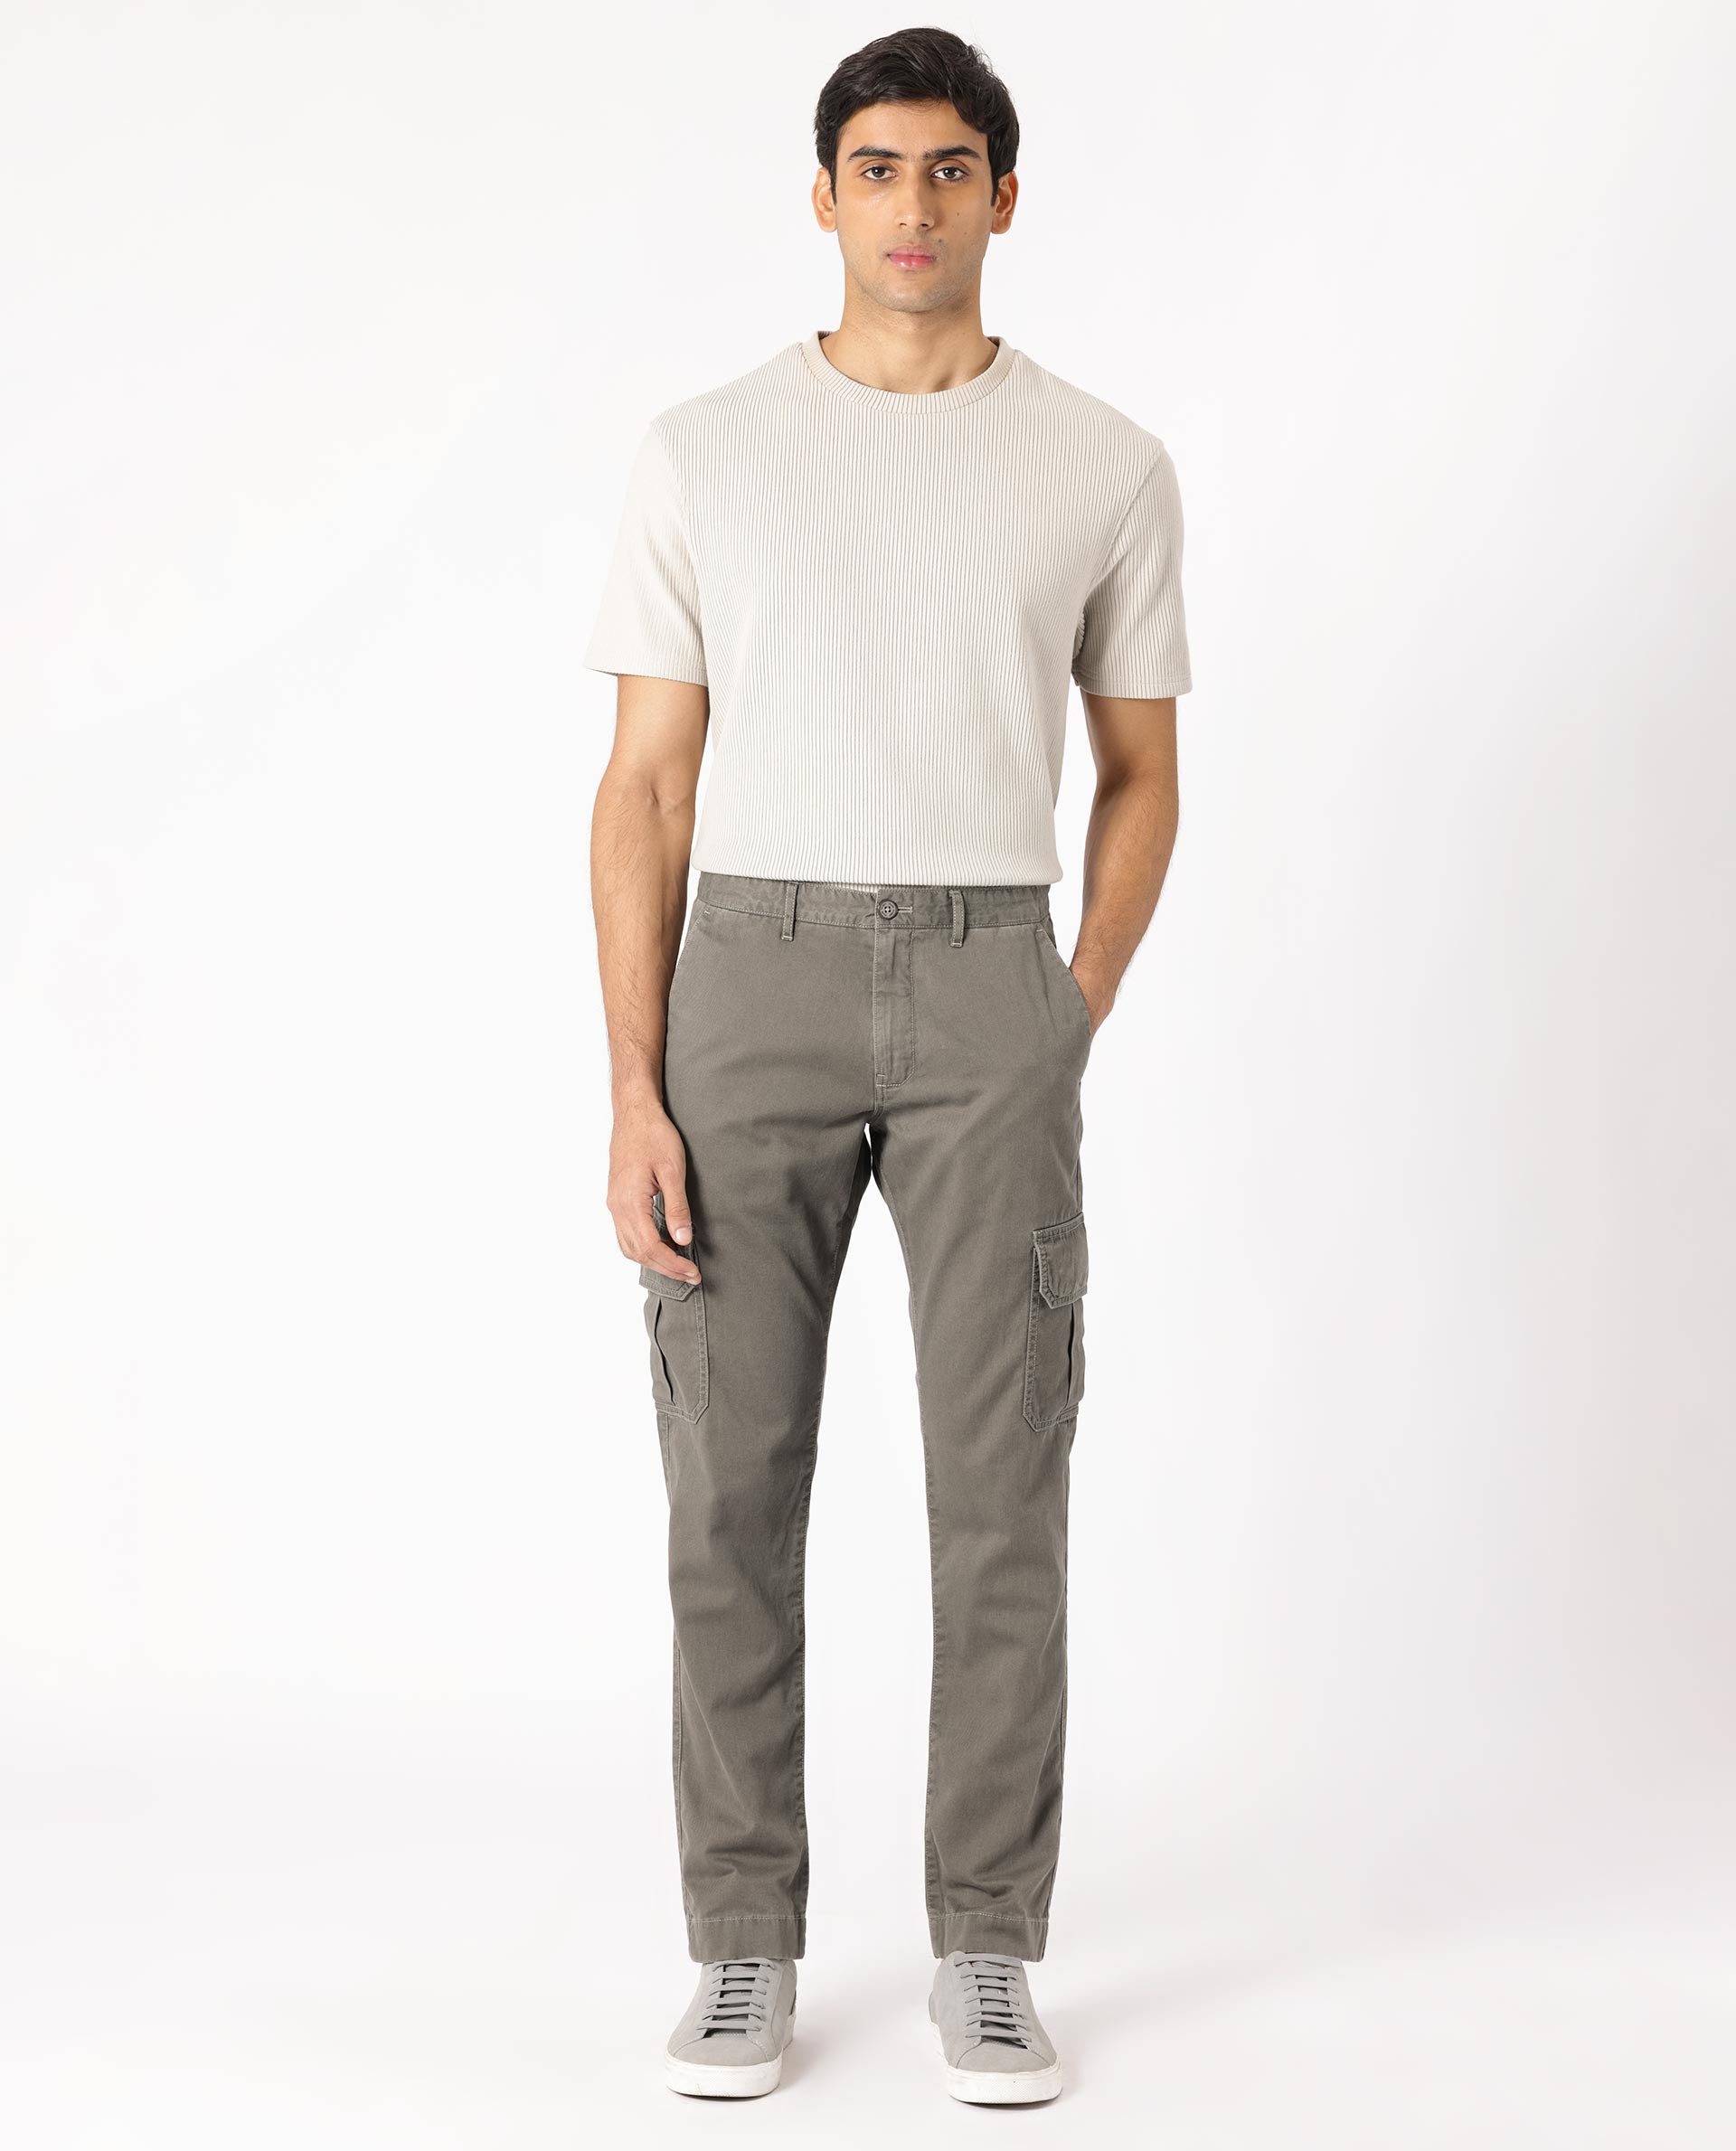 Relaxed Fit Cargo trousers - Dark khaki green - Men | H&M IN